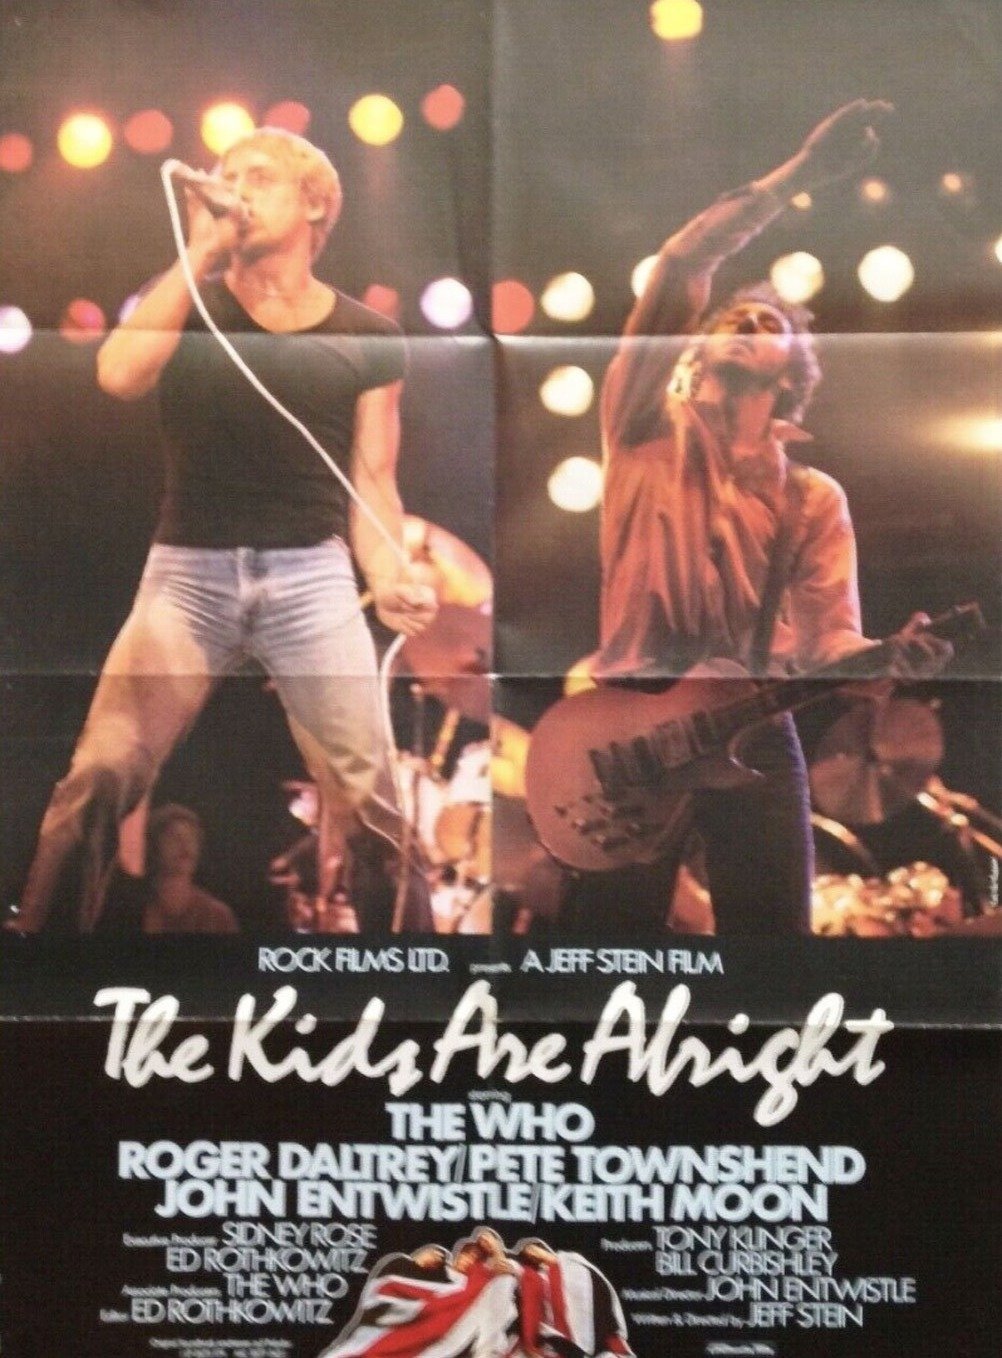 The Who - The Kids Are Alright (German) - Printed Originals